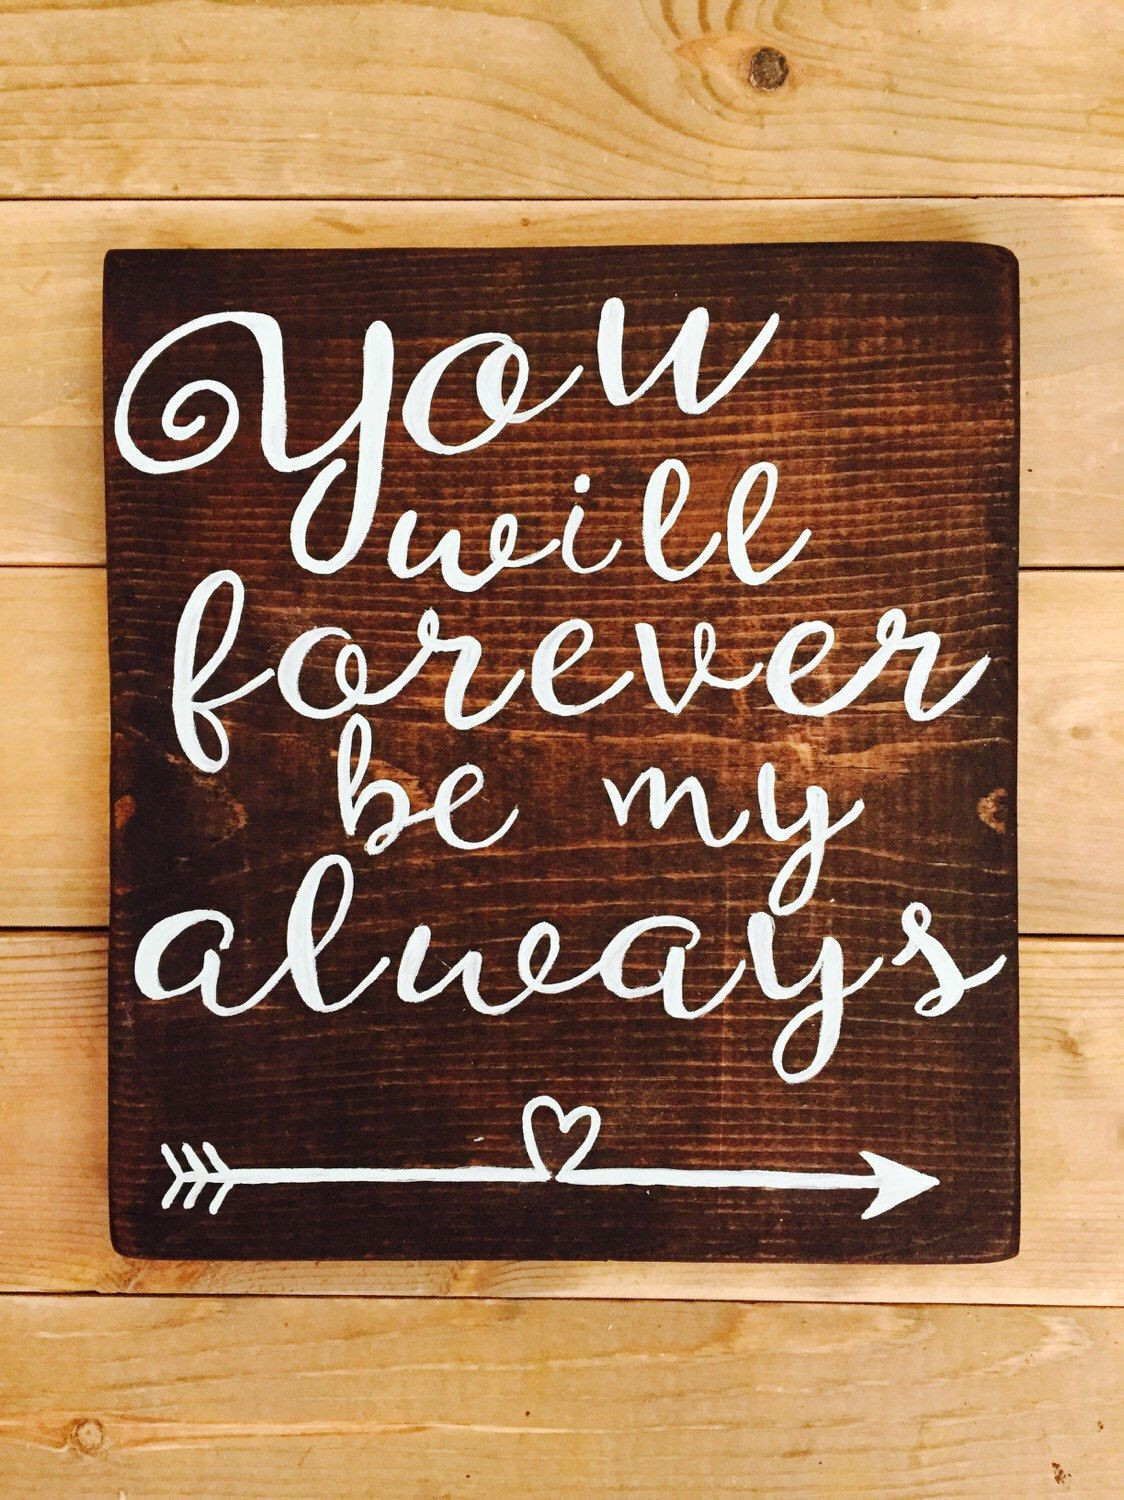 DIY Wood Signs With Quotes
 Pin by Courtney Elaine on For the Home